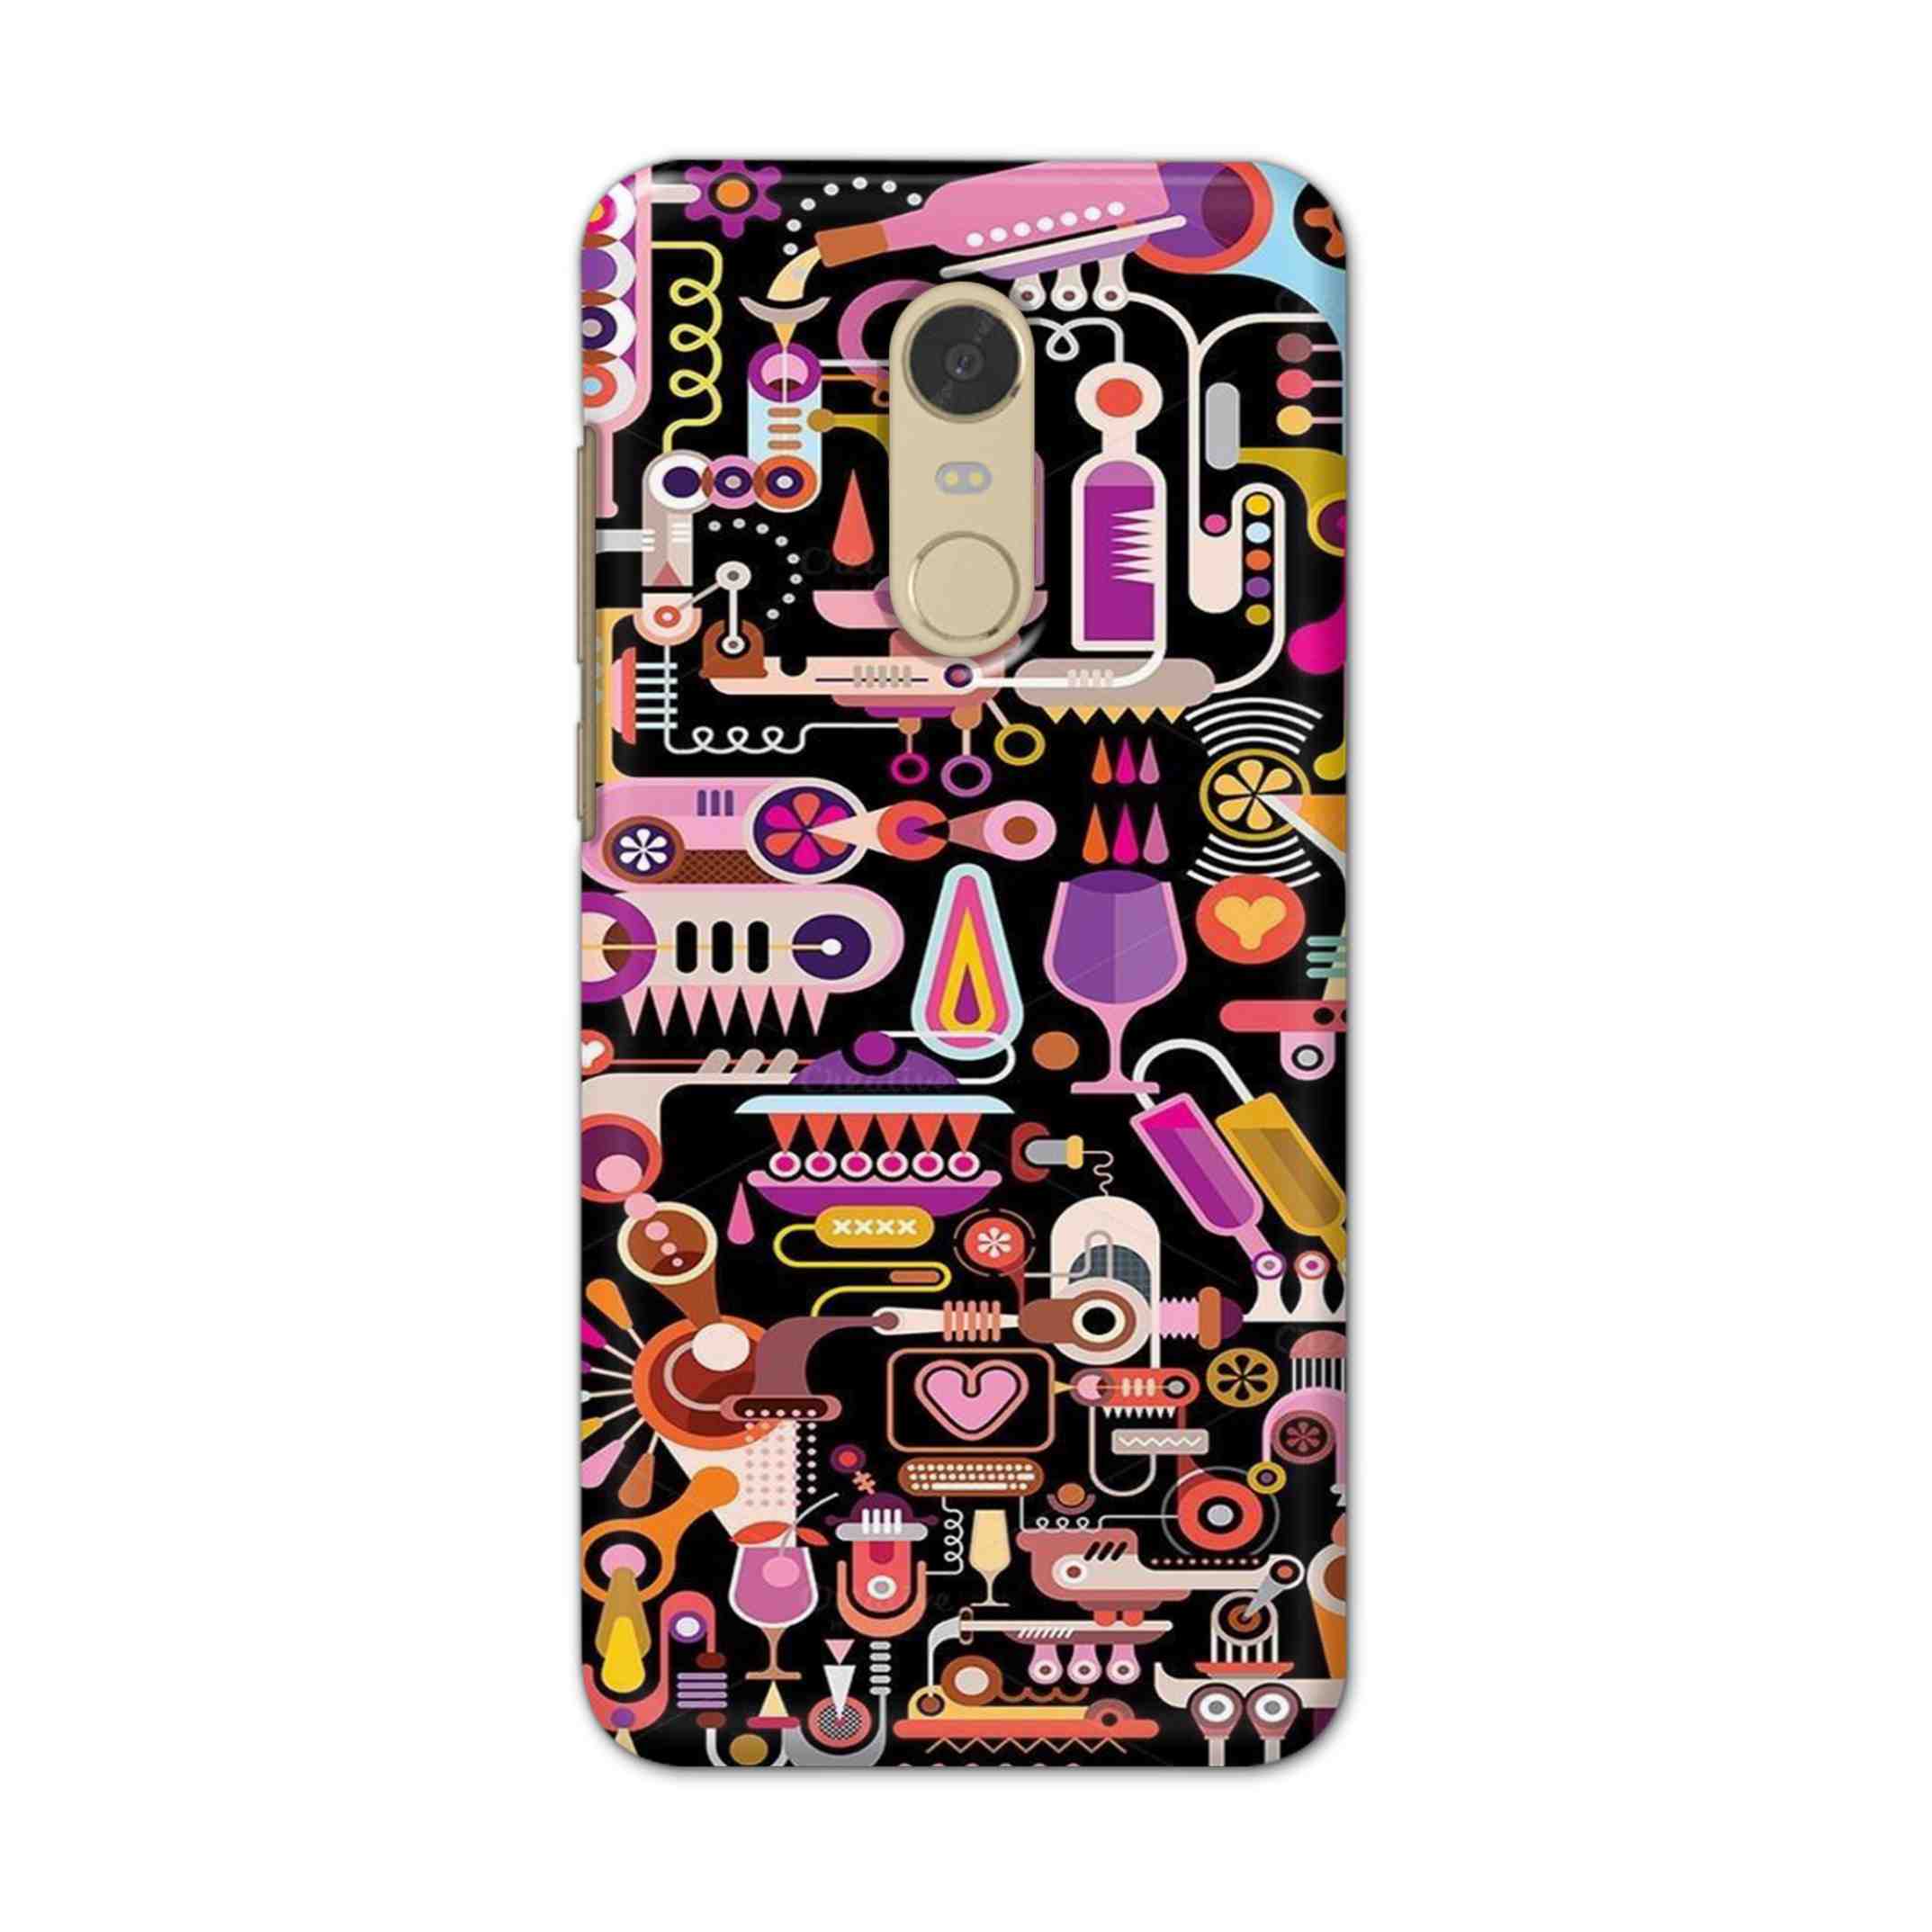 Buy Art Hard Back Mobile Phone Case/Cover For Redmi Note 6 Online